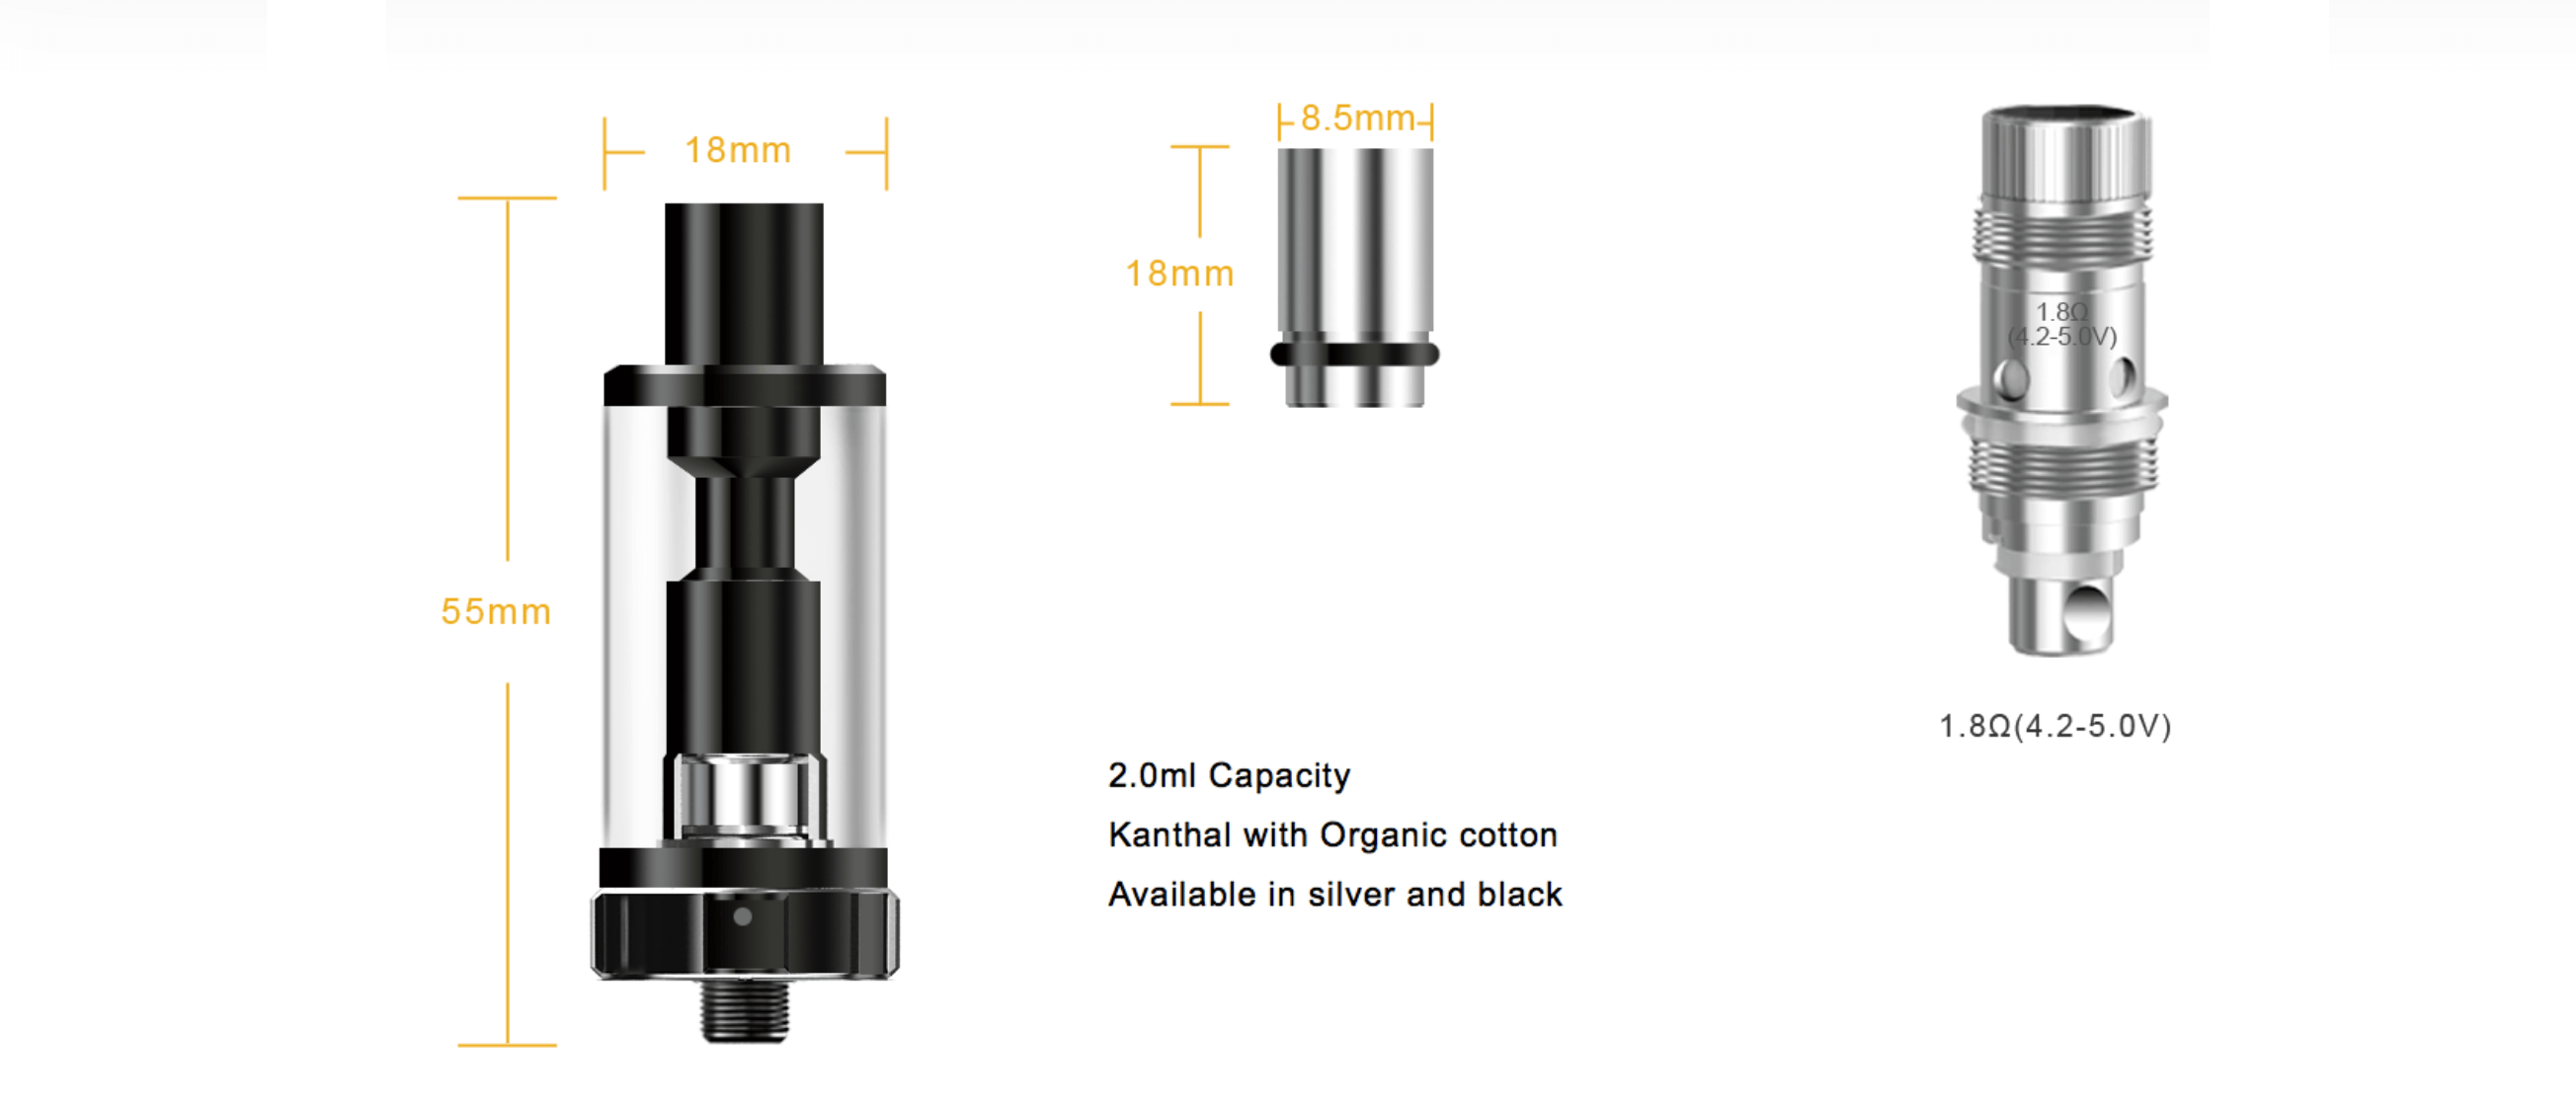 Aspire k3 Tank expanded view of components